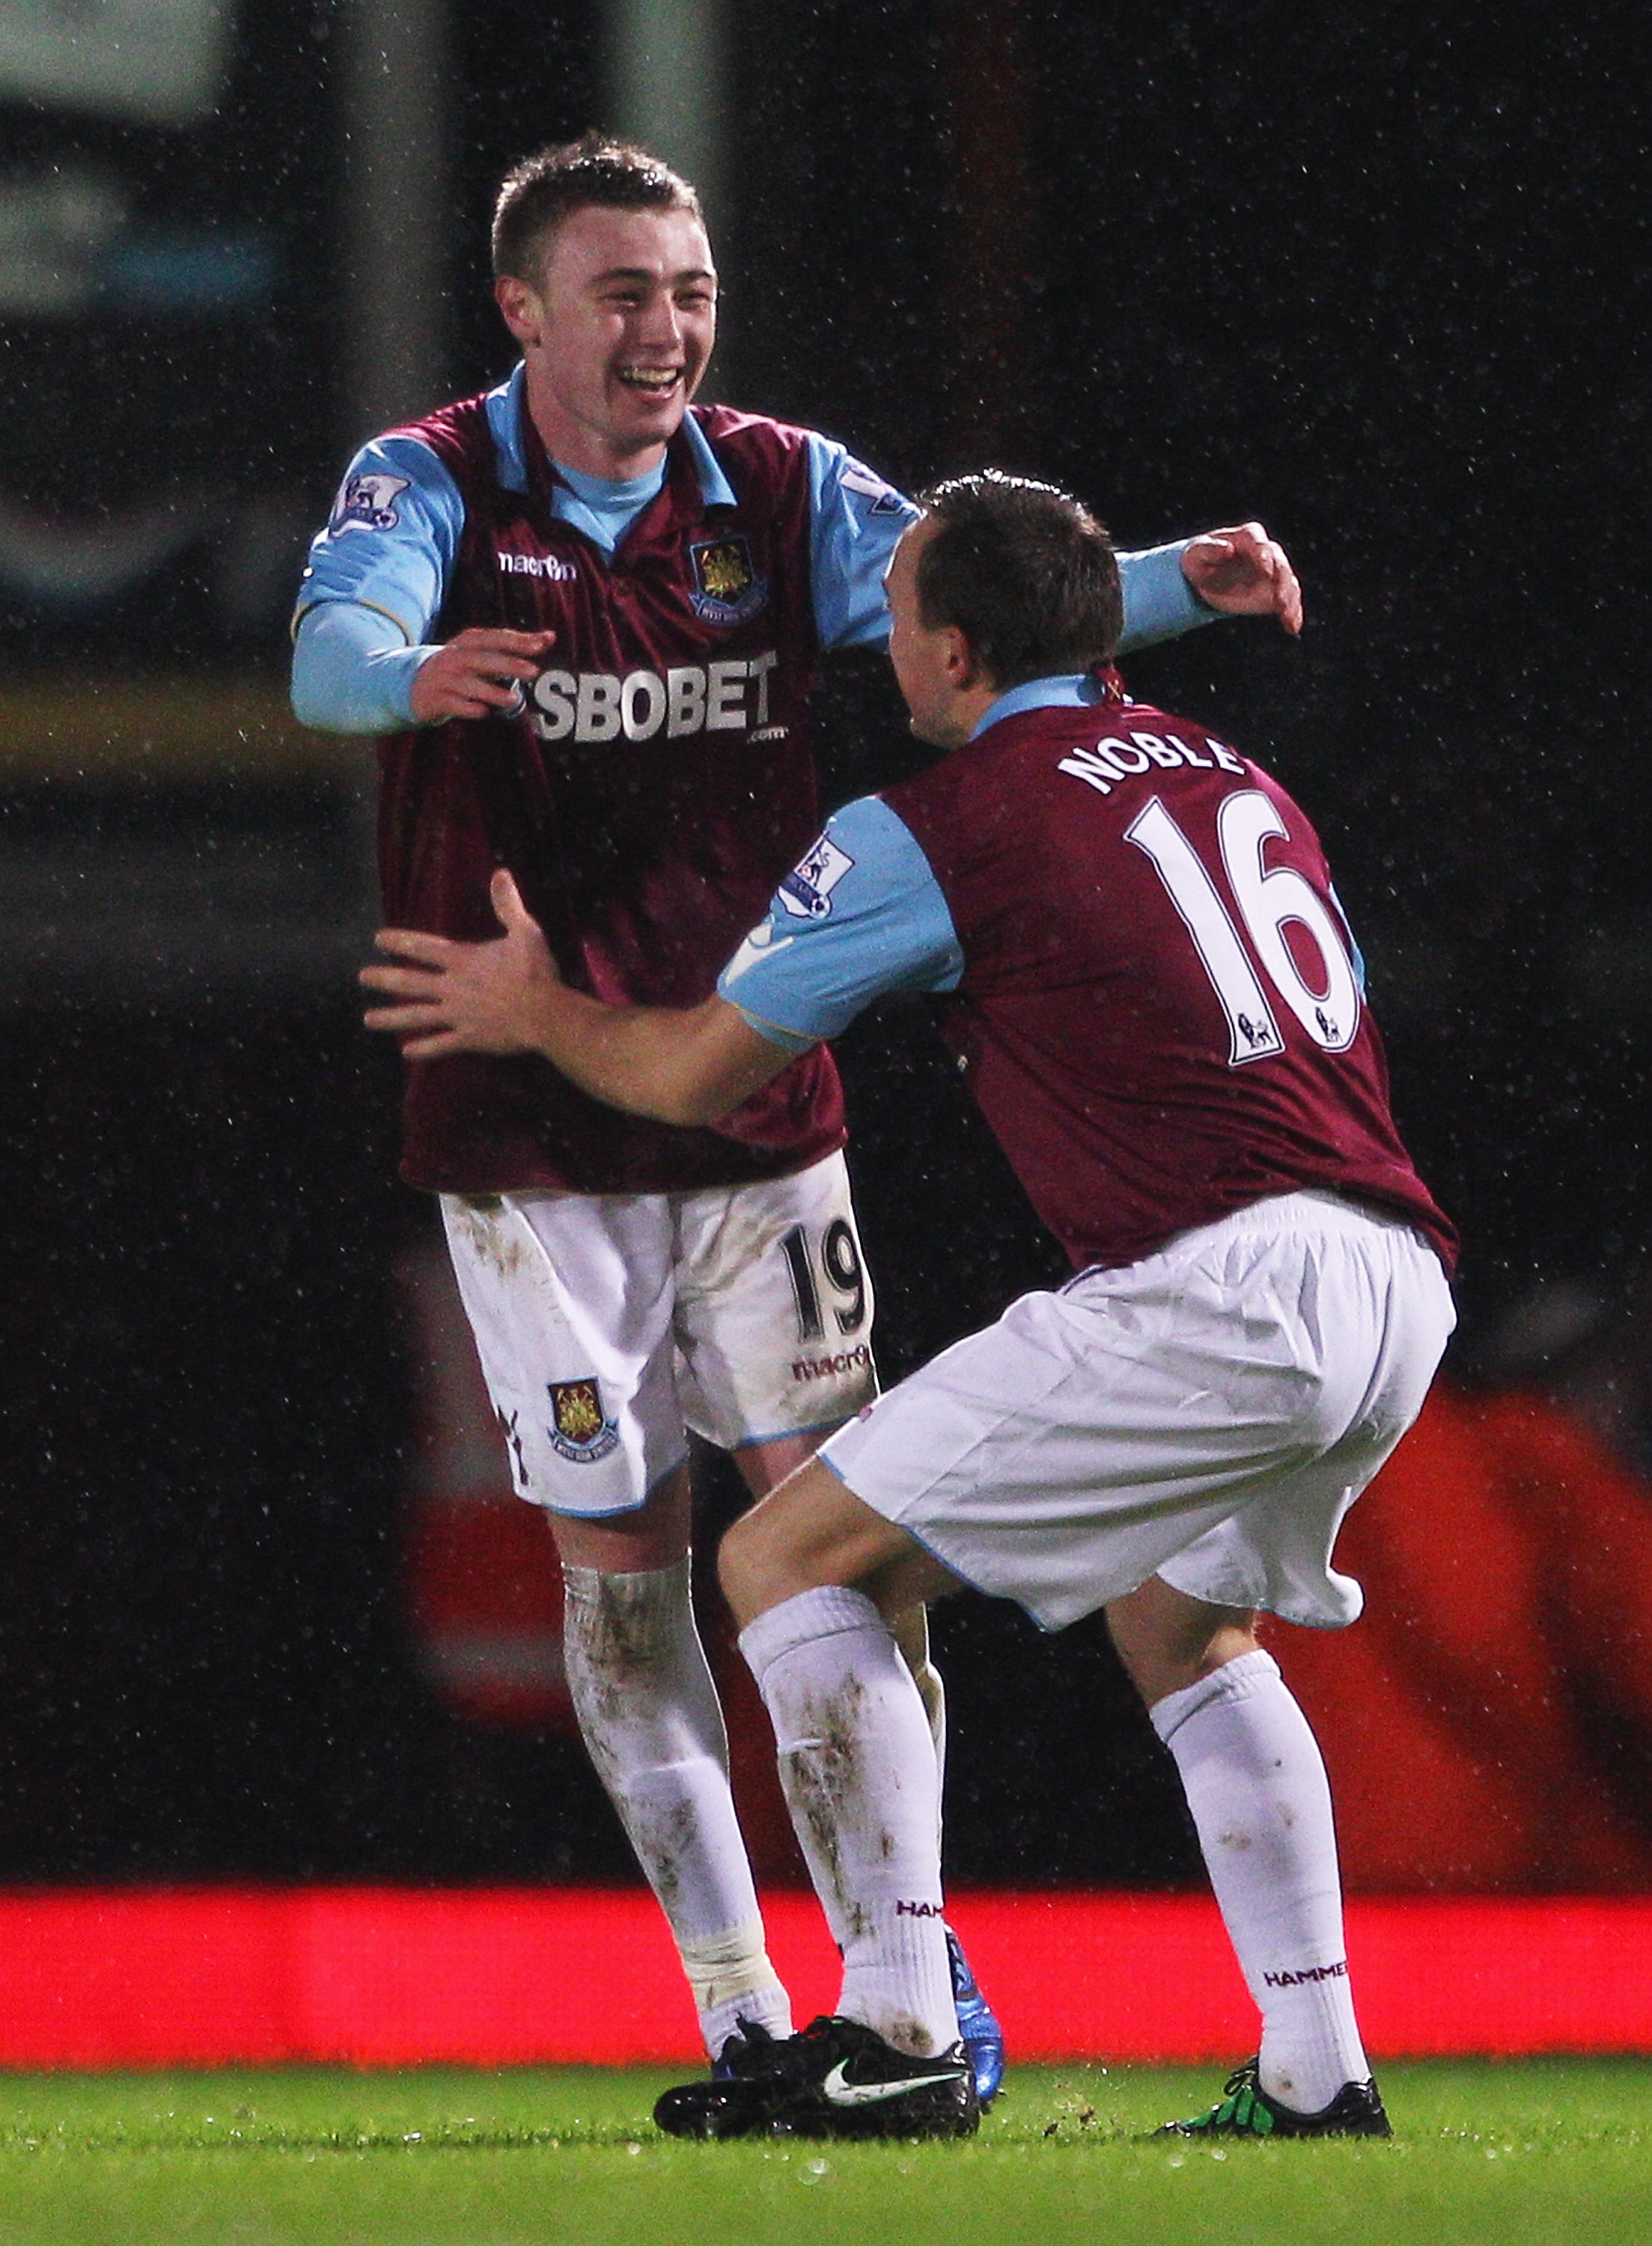 LONDON, ENGLAND - JANUARY 01: Freddie Sears of West Ham United celebrates his goal with Mark Noble during the Barclays Premier League match between West Ham United and Wolverhampton Wanderers at the Boleyn Ground on January 1, 2011 in London, England.  (P